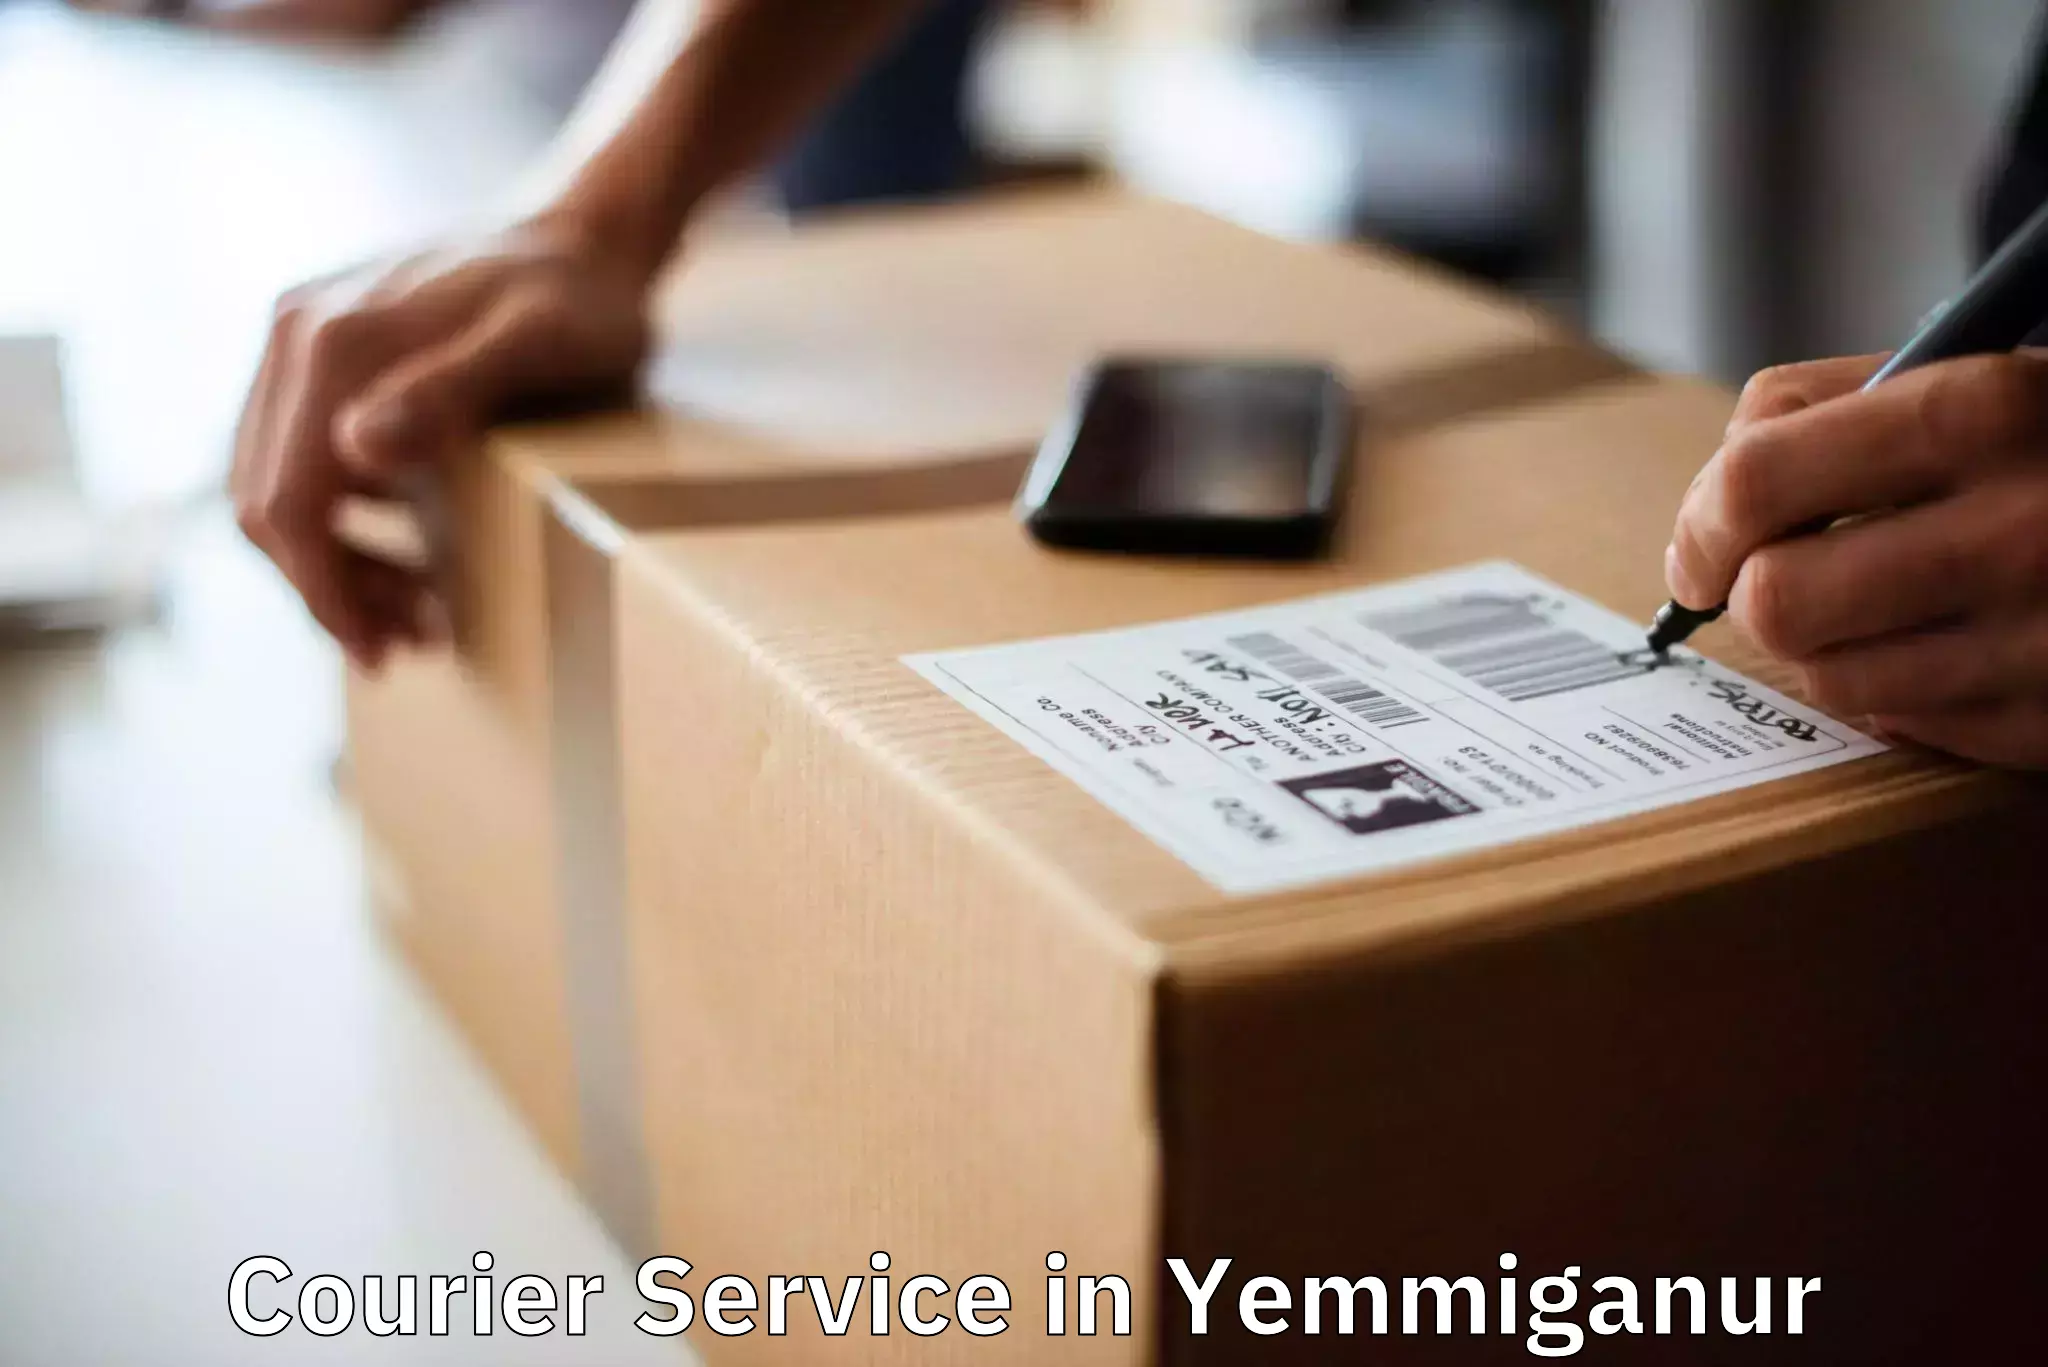 Personal courier services in Yemmiganur